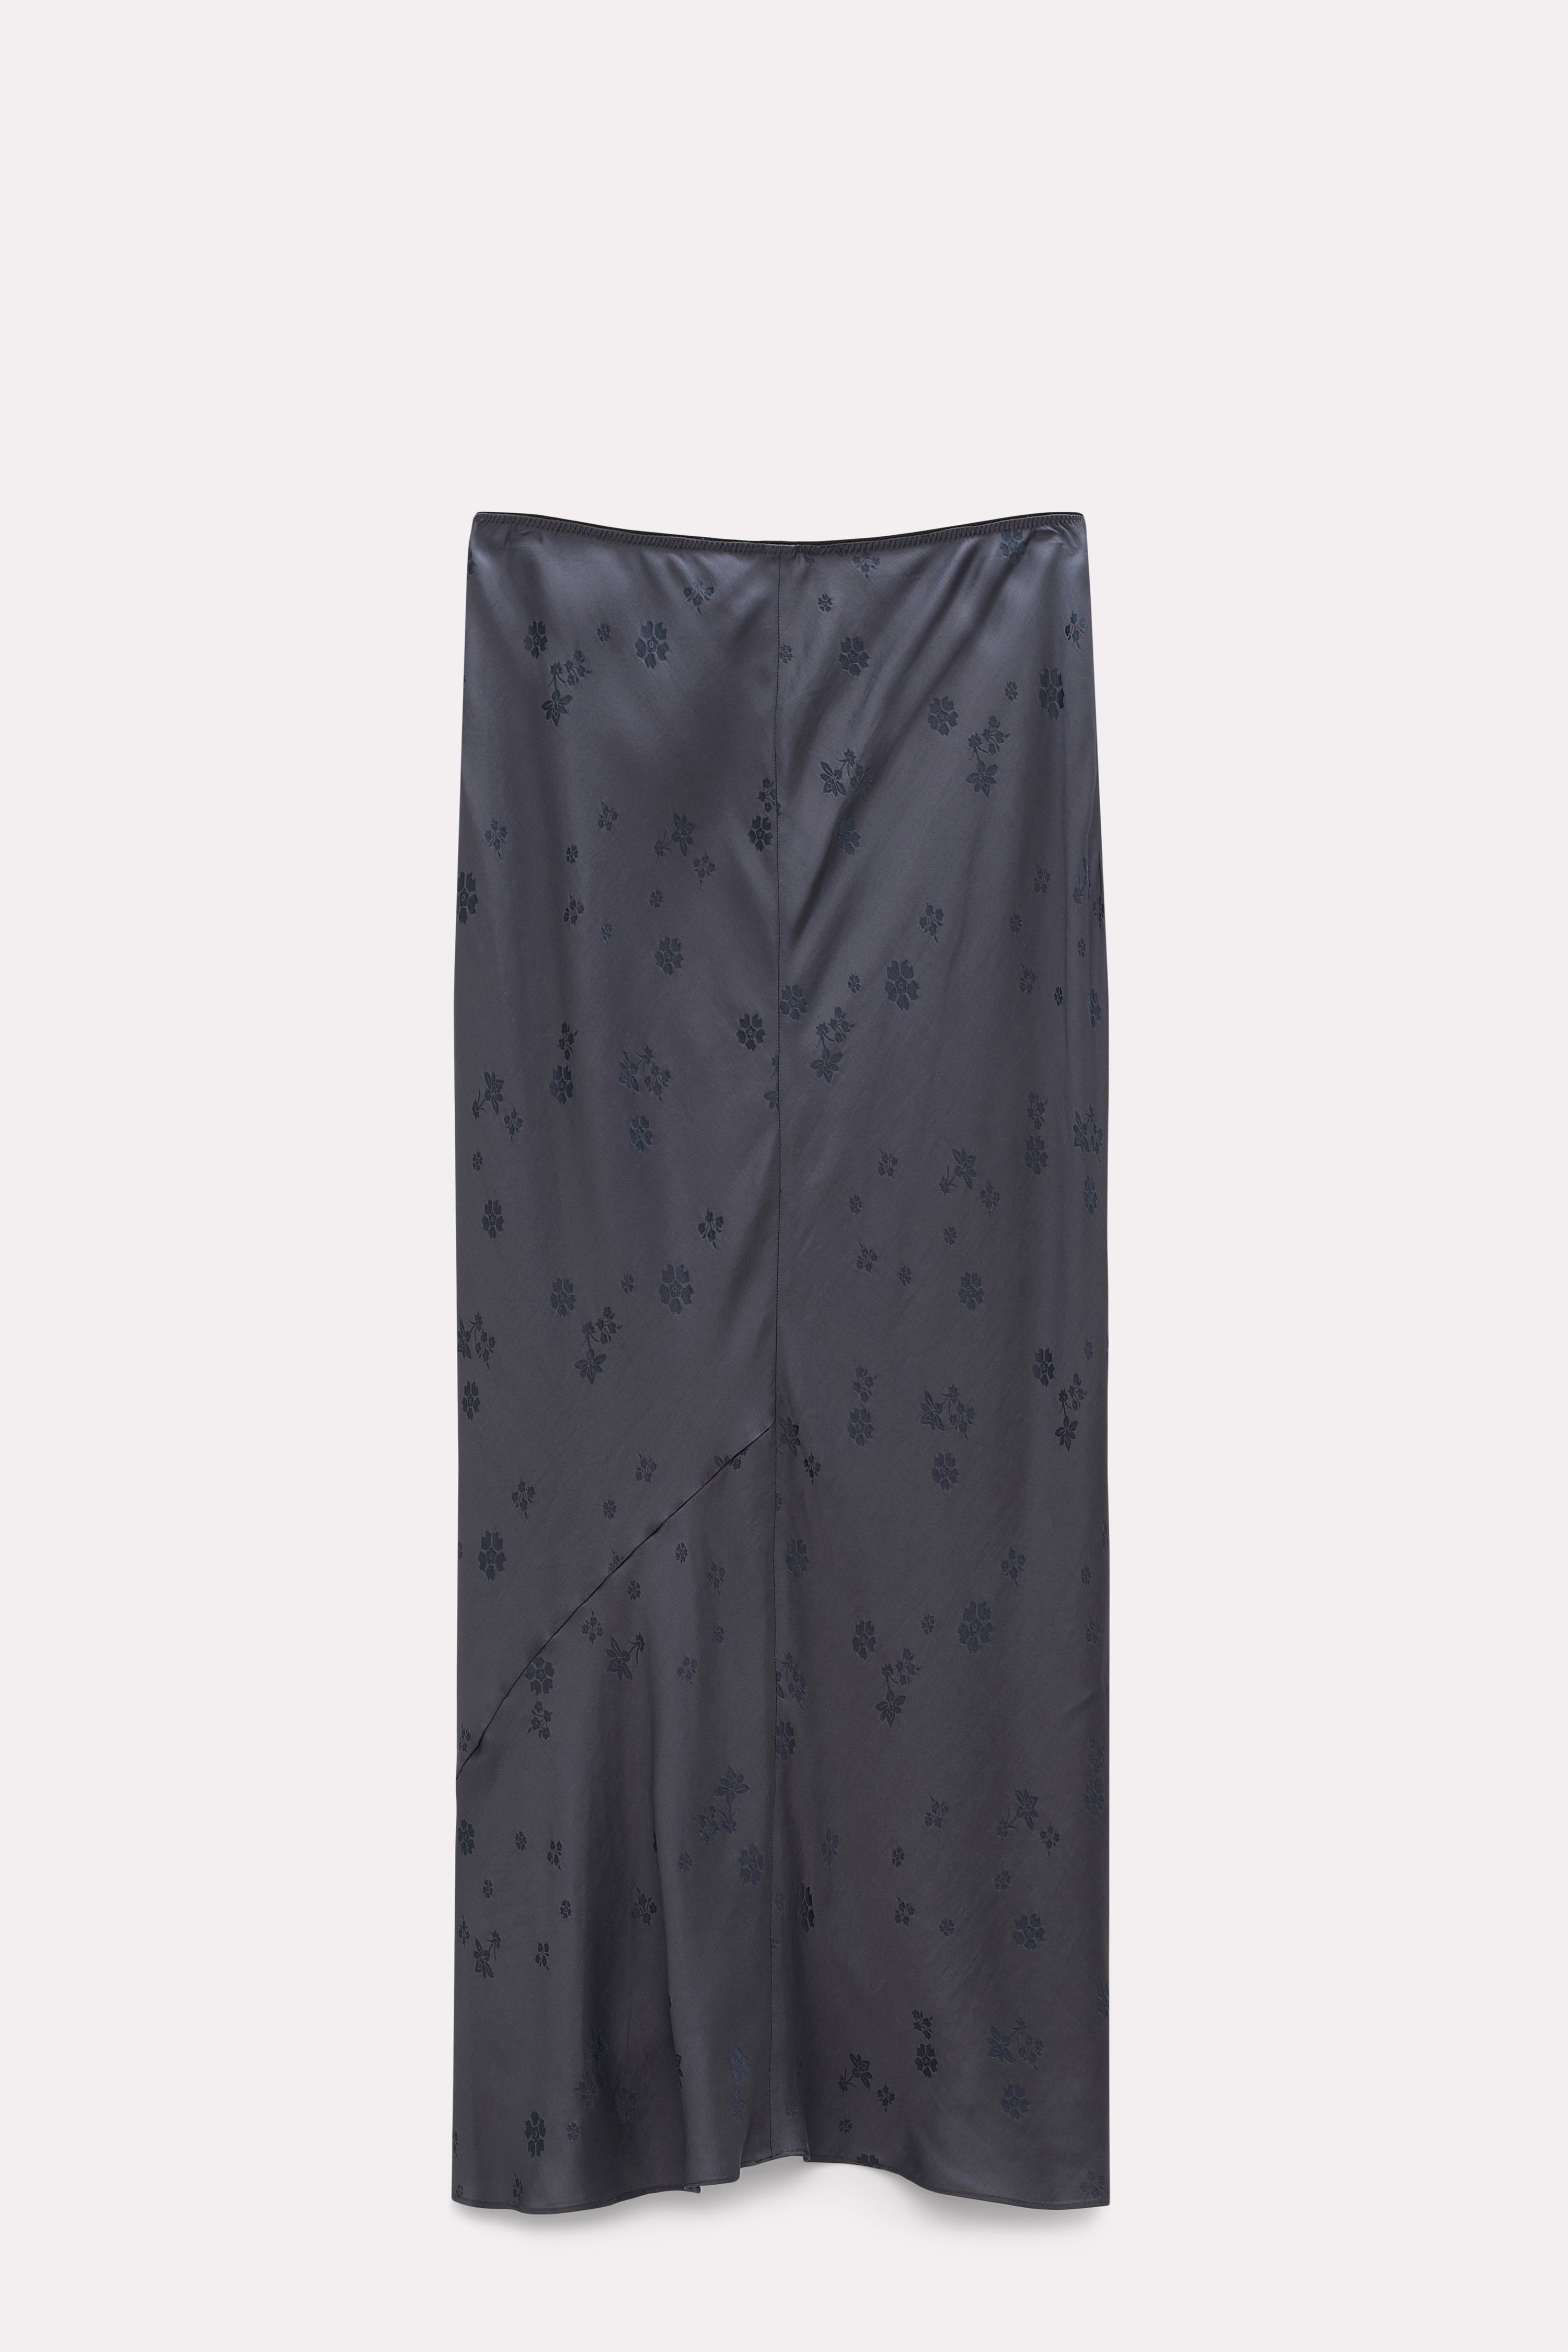 SENSUAL STRUCTURES skirt